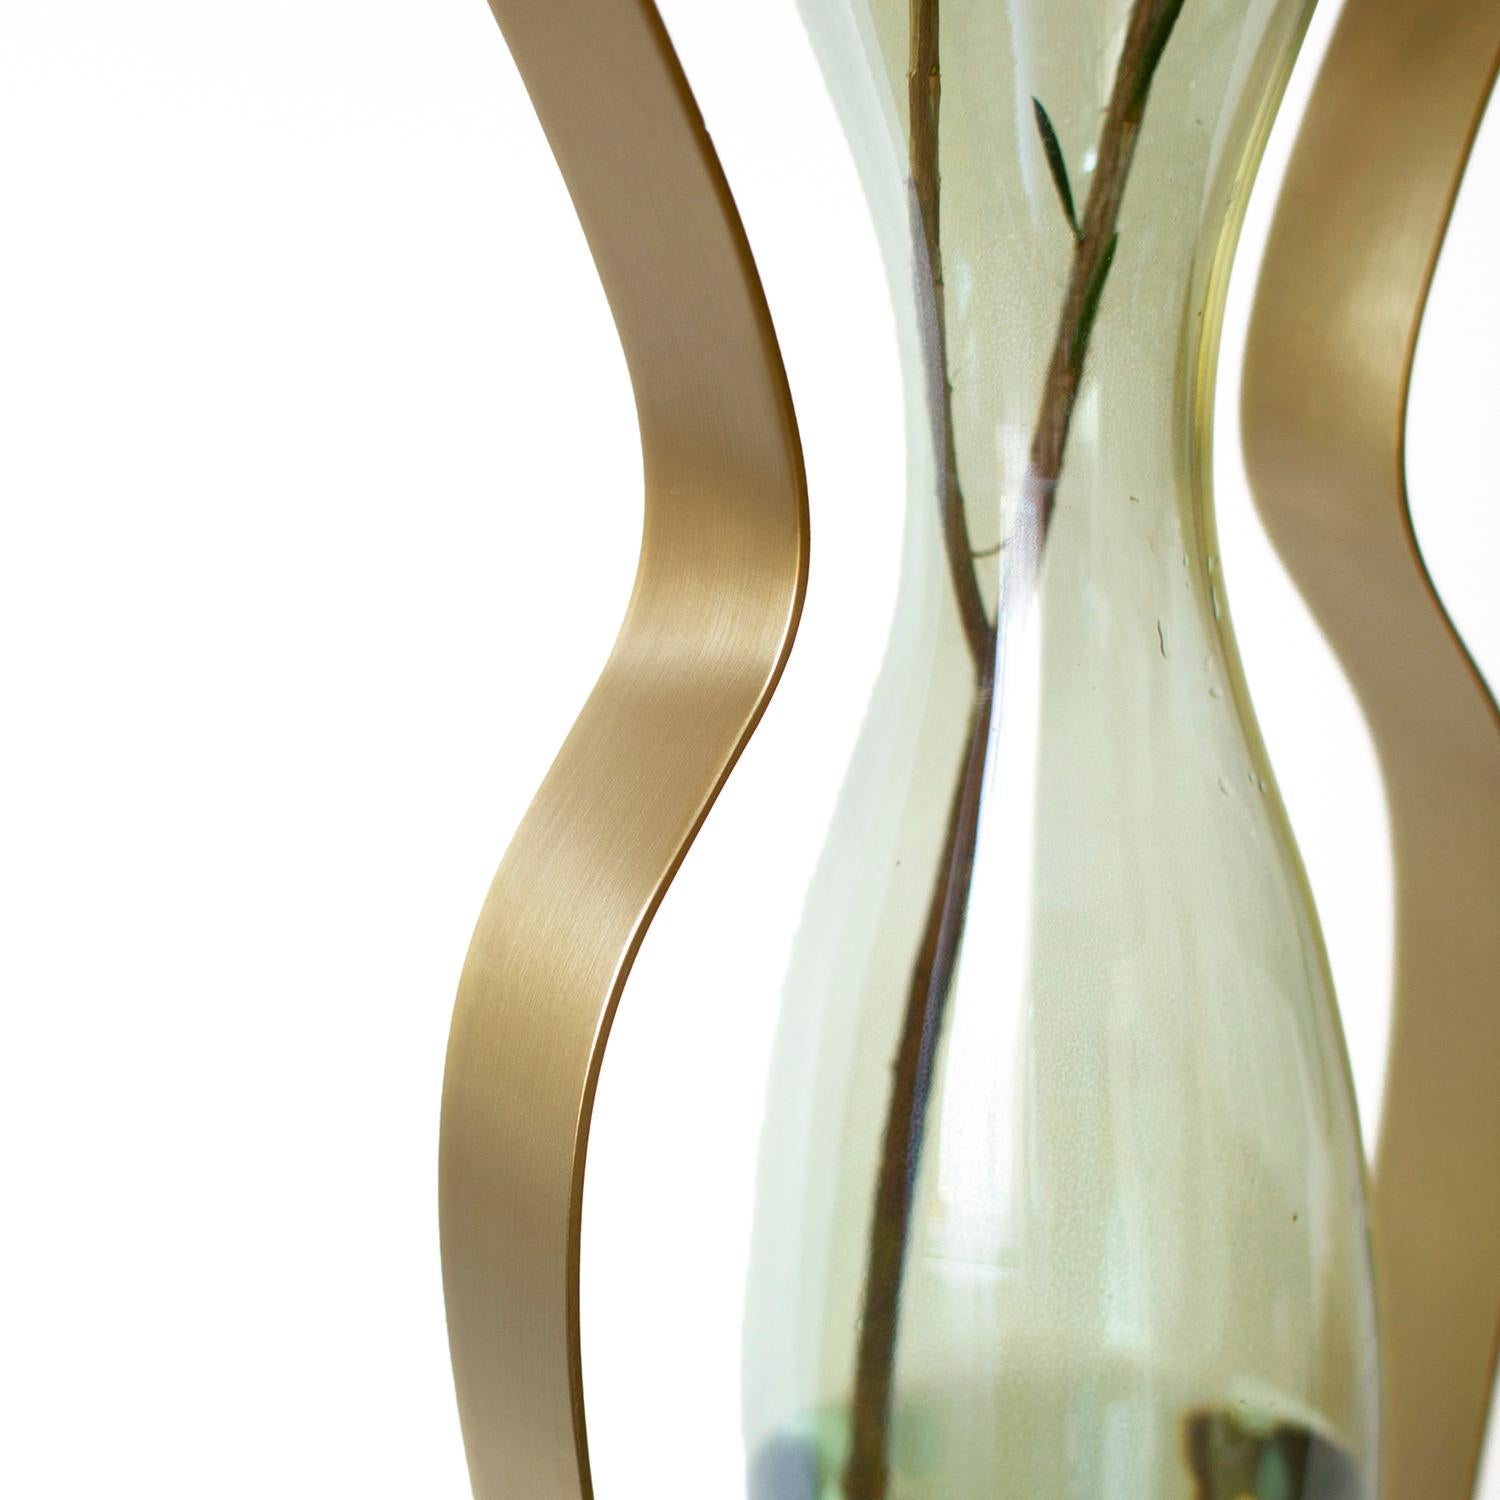 Minimalist Droplet Tall Vase, Green Glass & Gold For Sale